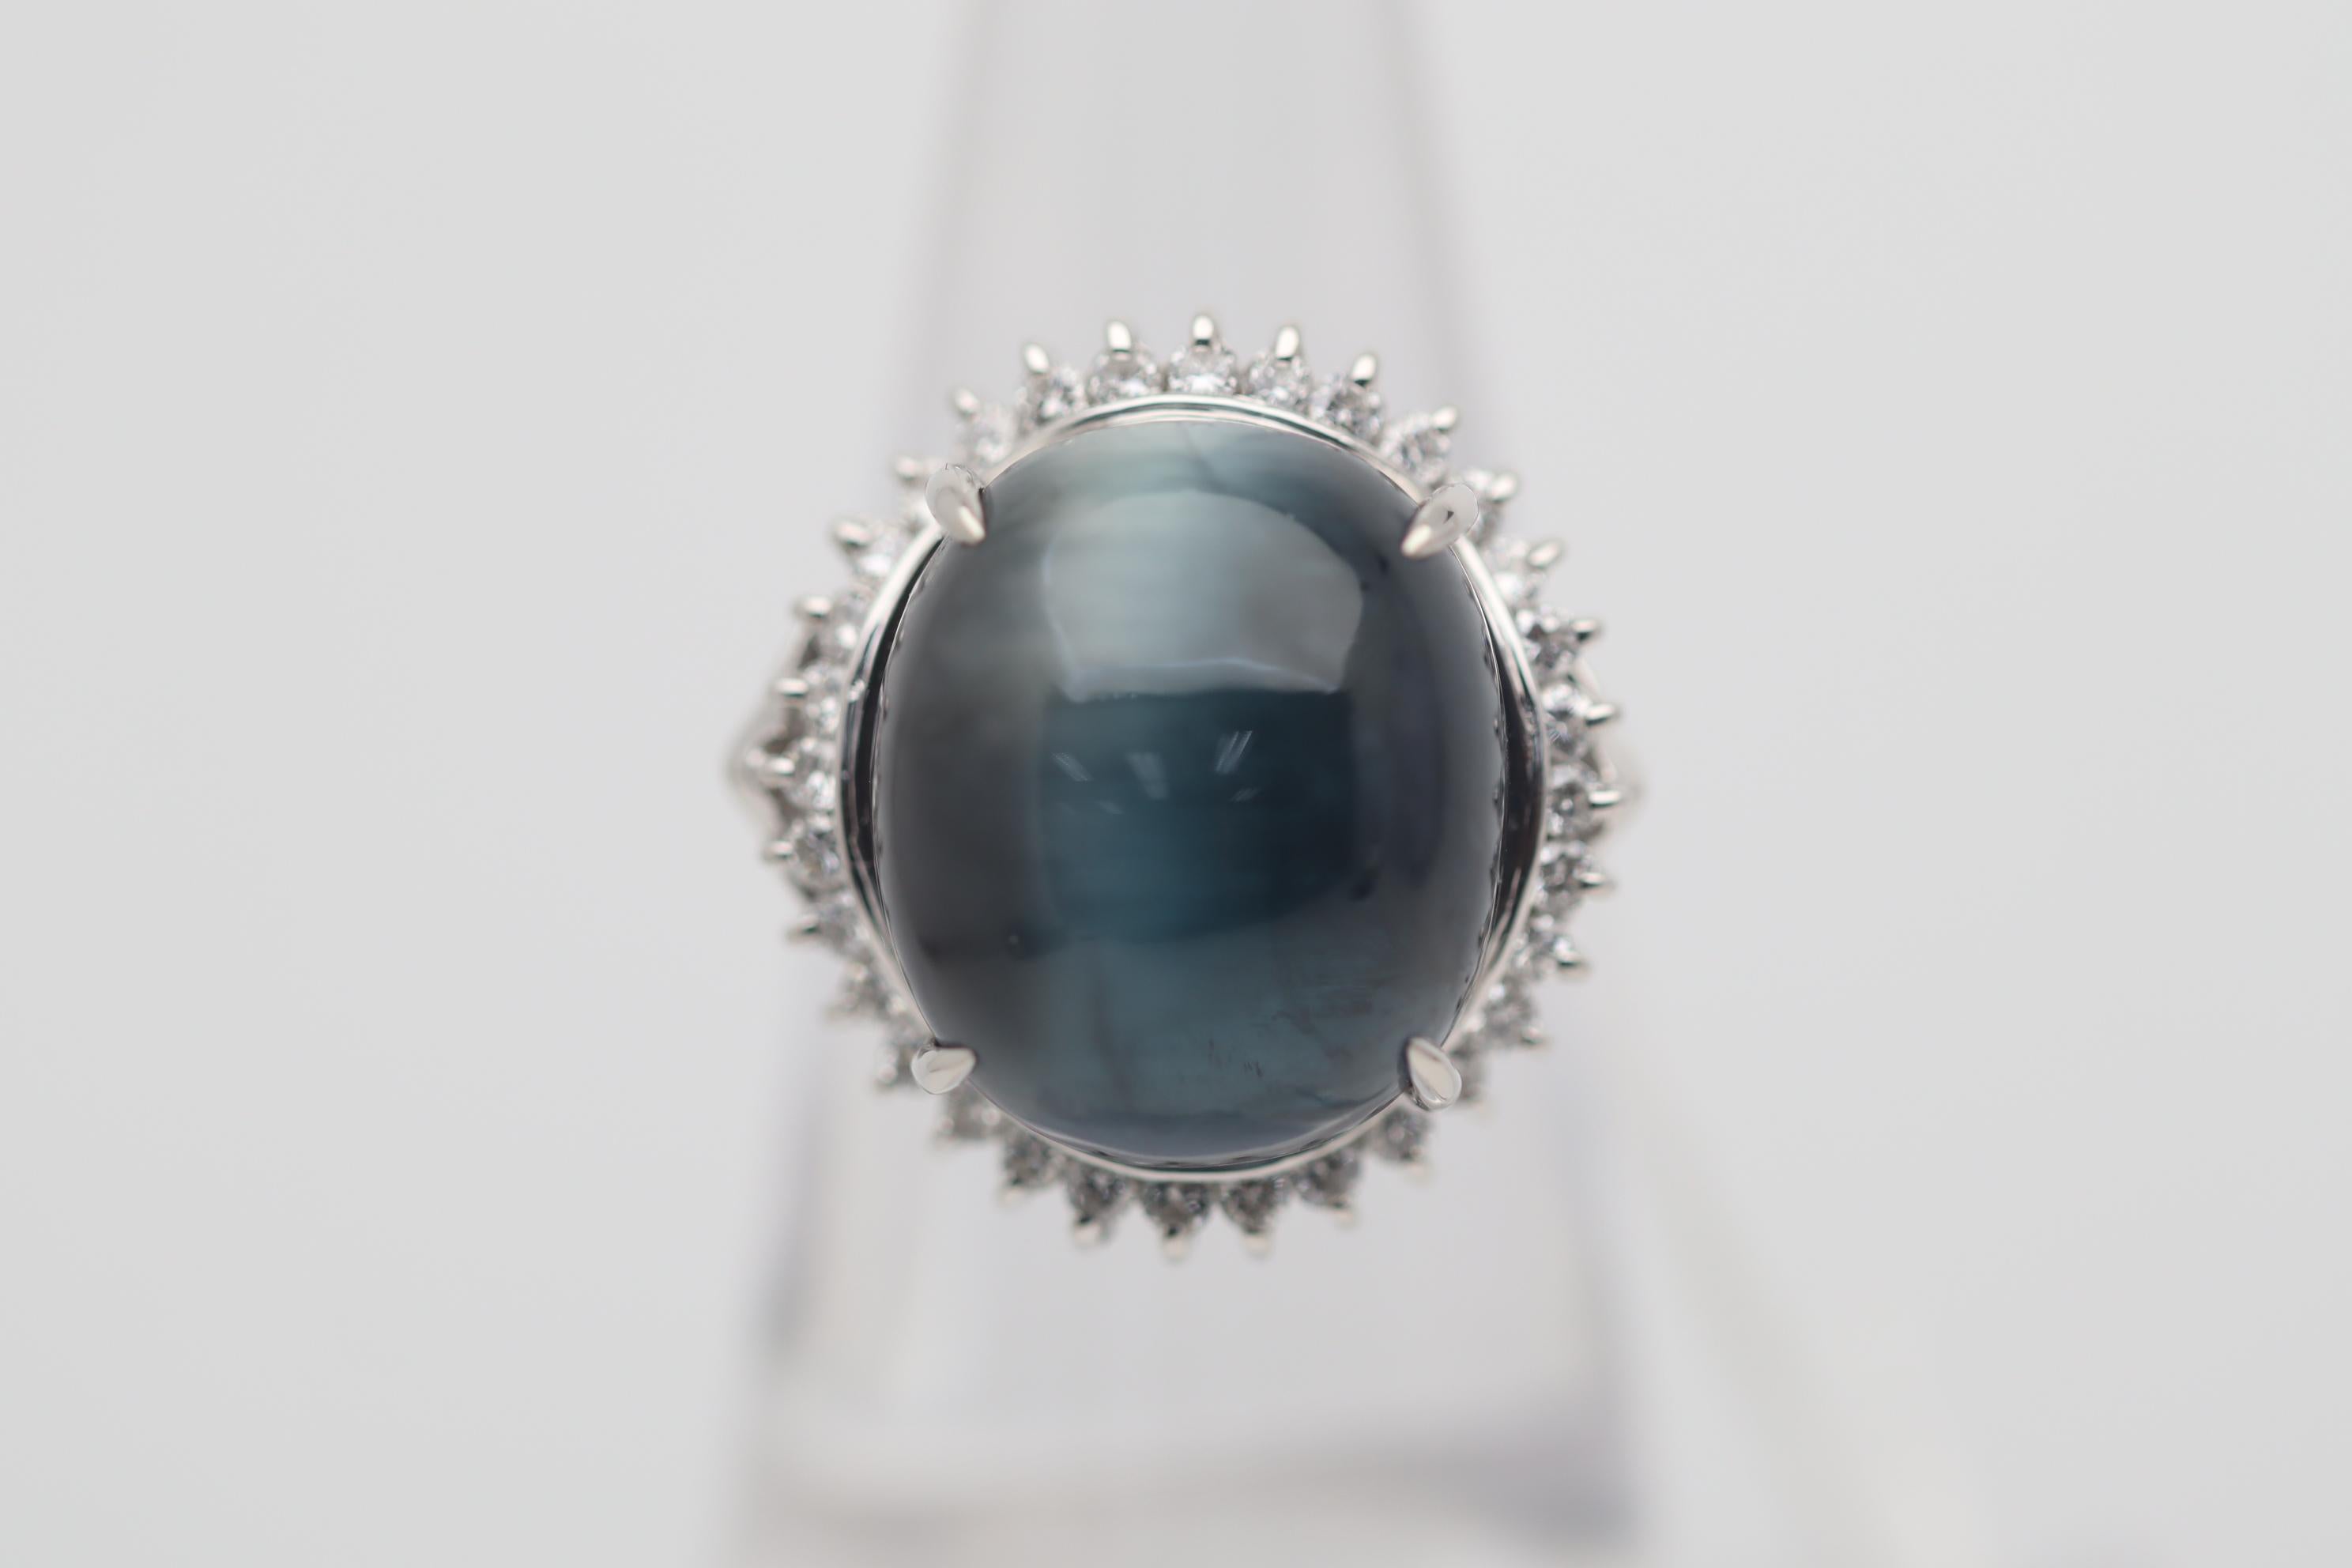 A large and impressive ring featuring a unique and rare gem! The beautifully colored tourmaline is known as indicolite for its rich slightly greenish-blue color. It weighs 18.59 carats and what makes it unique is its strong cats eye! Tourmalines are